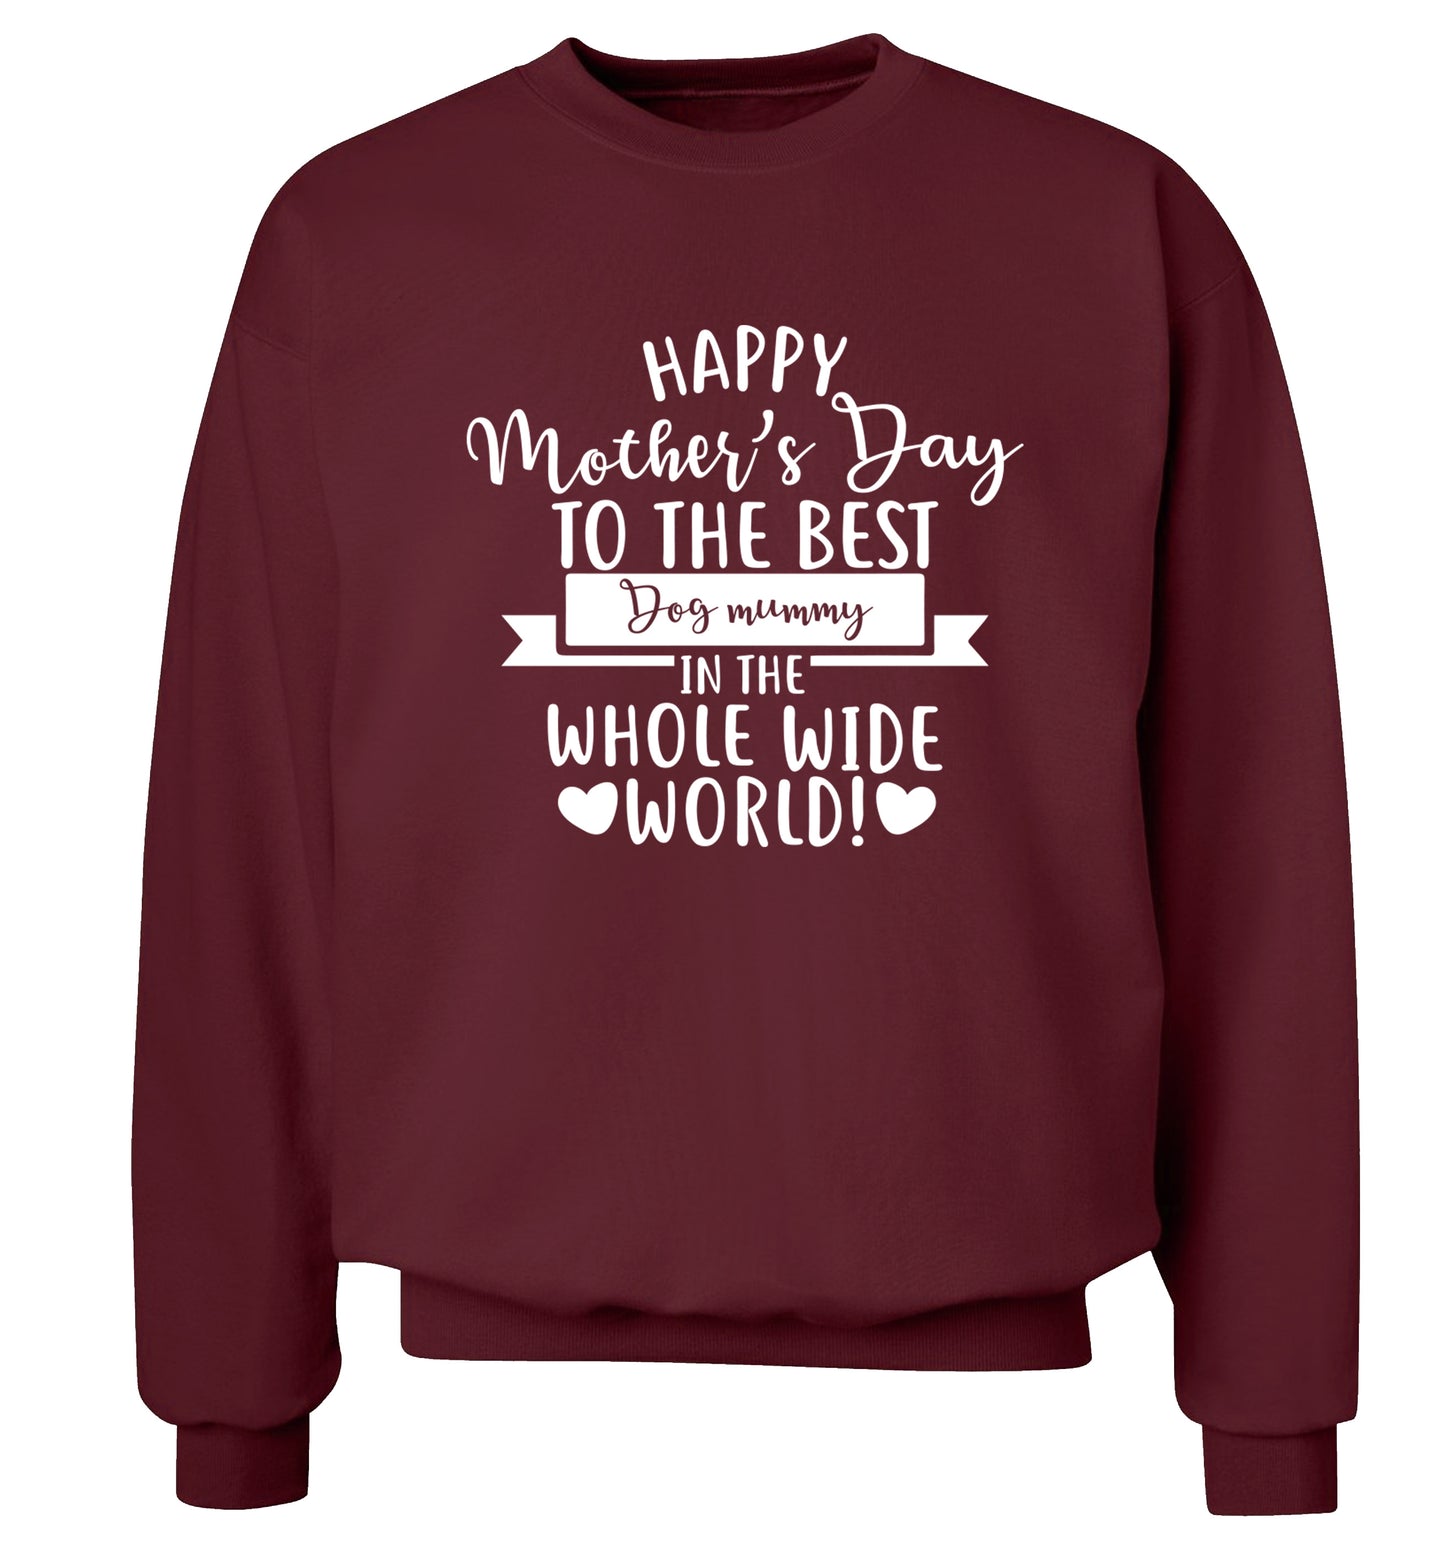 Happy mother's day to the best dog mummy in the world Adult's unisex maroon Sweater 2XL